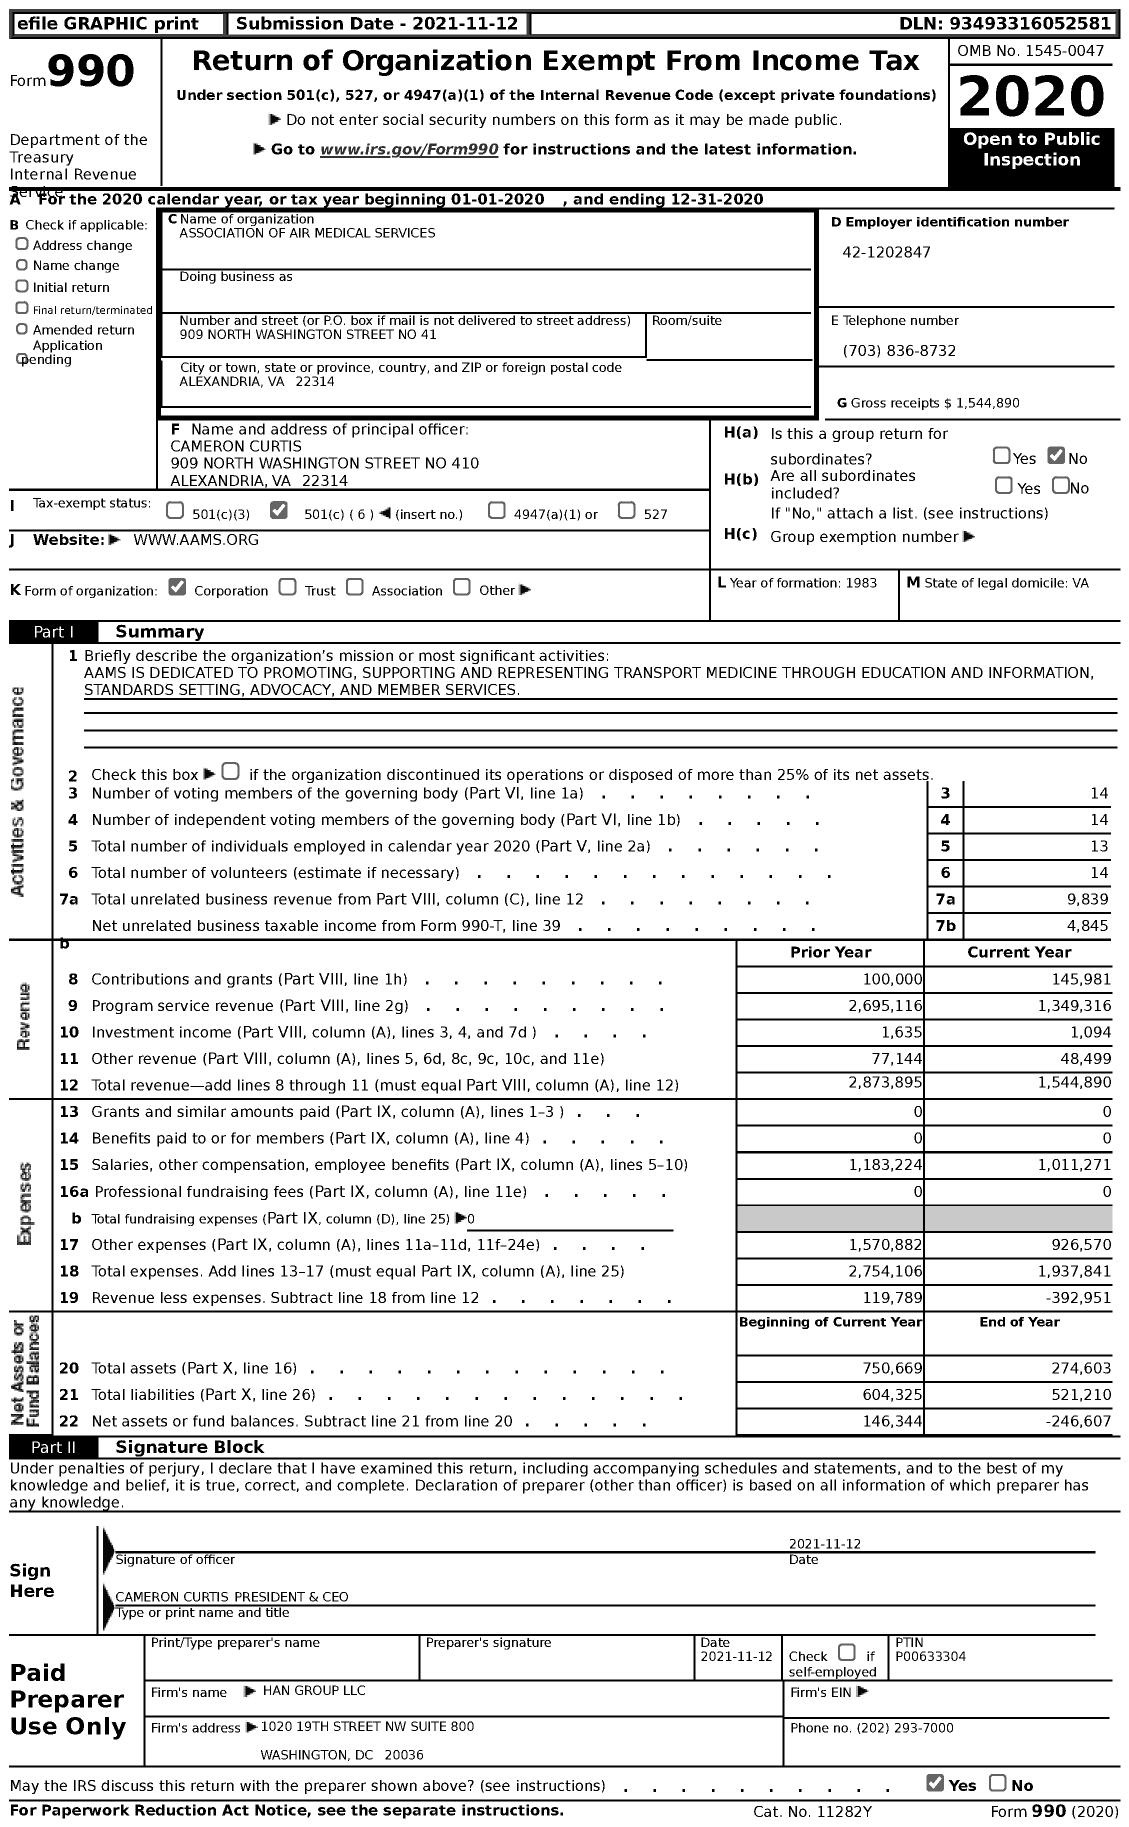 Image of first page of 2020 Form 990 for Association of Air Medical Services (AAMS)